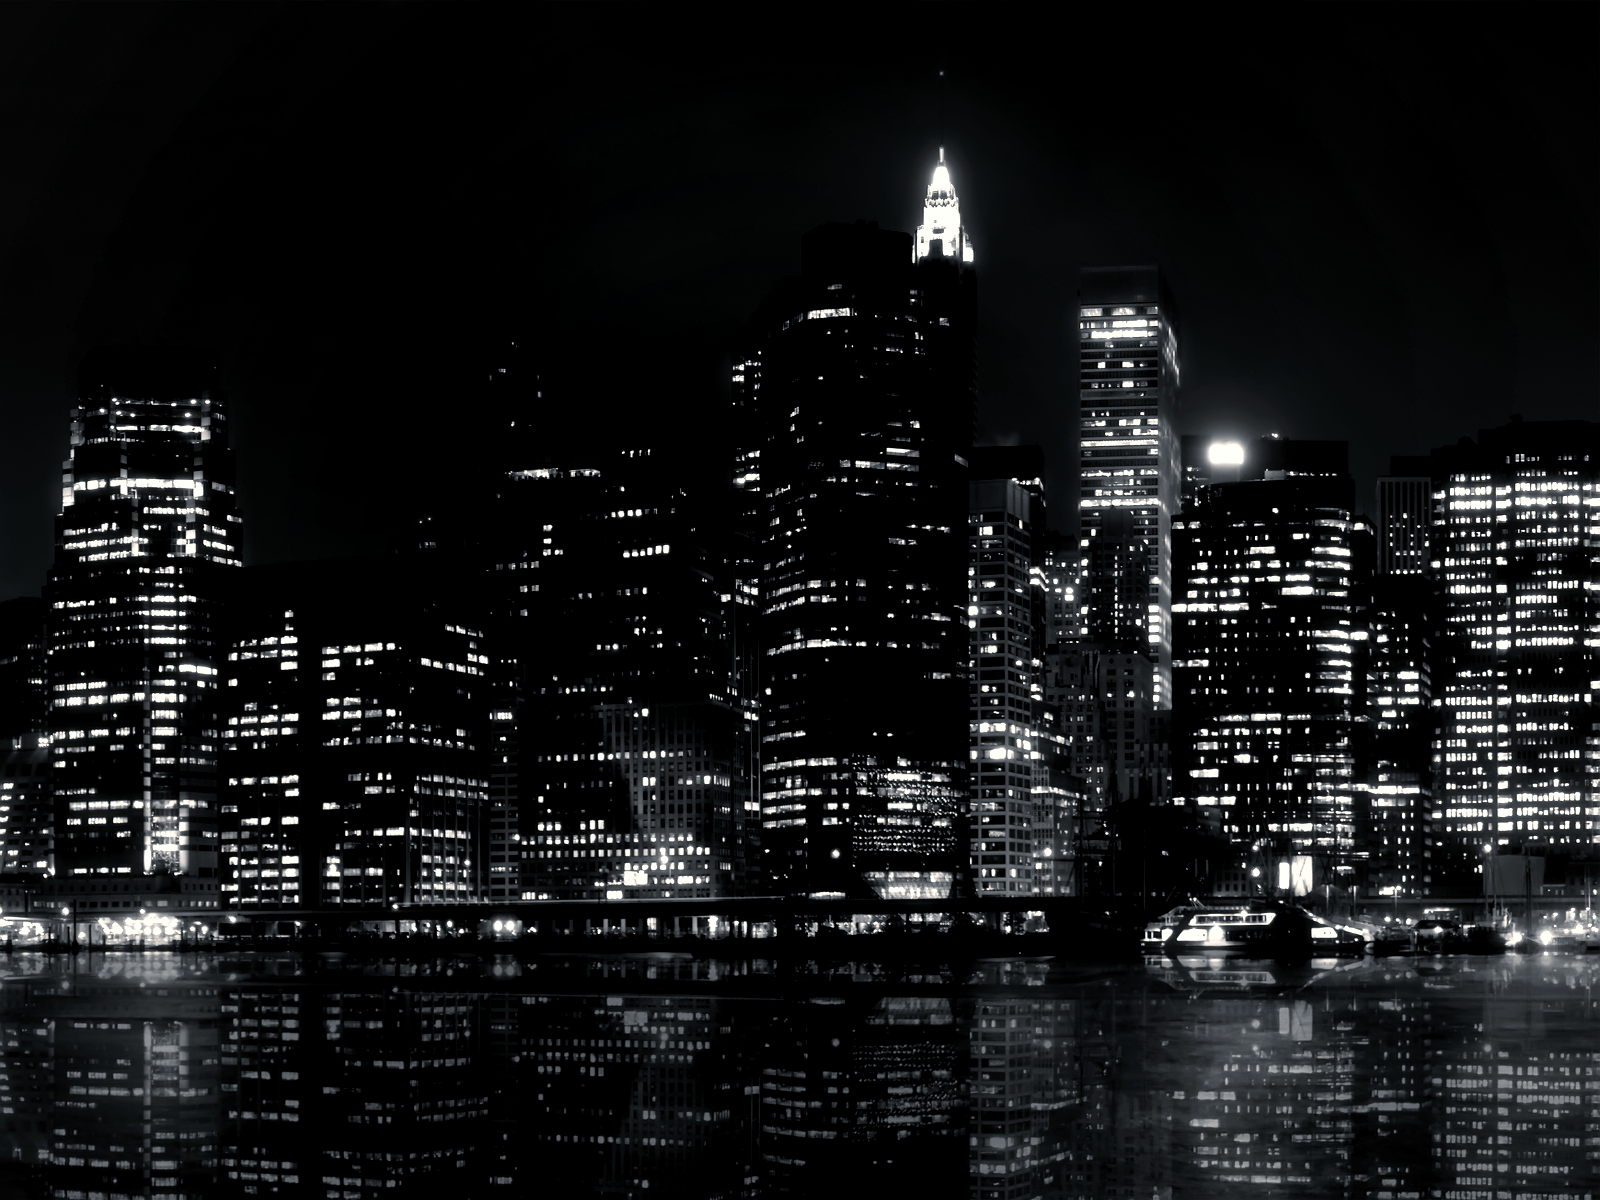  Black  and White  City Northern River wallpaper  Republican 